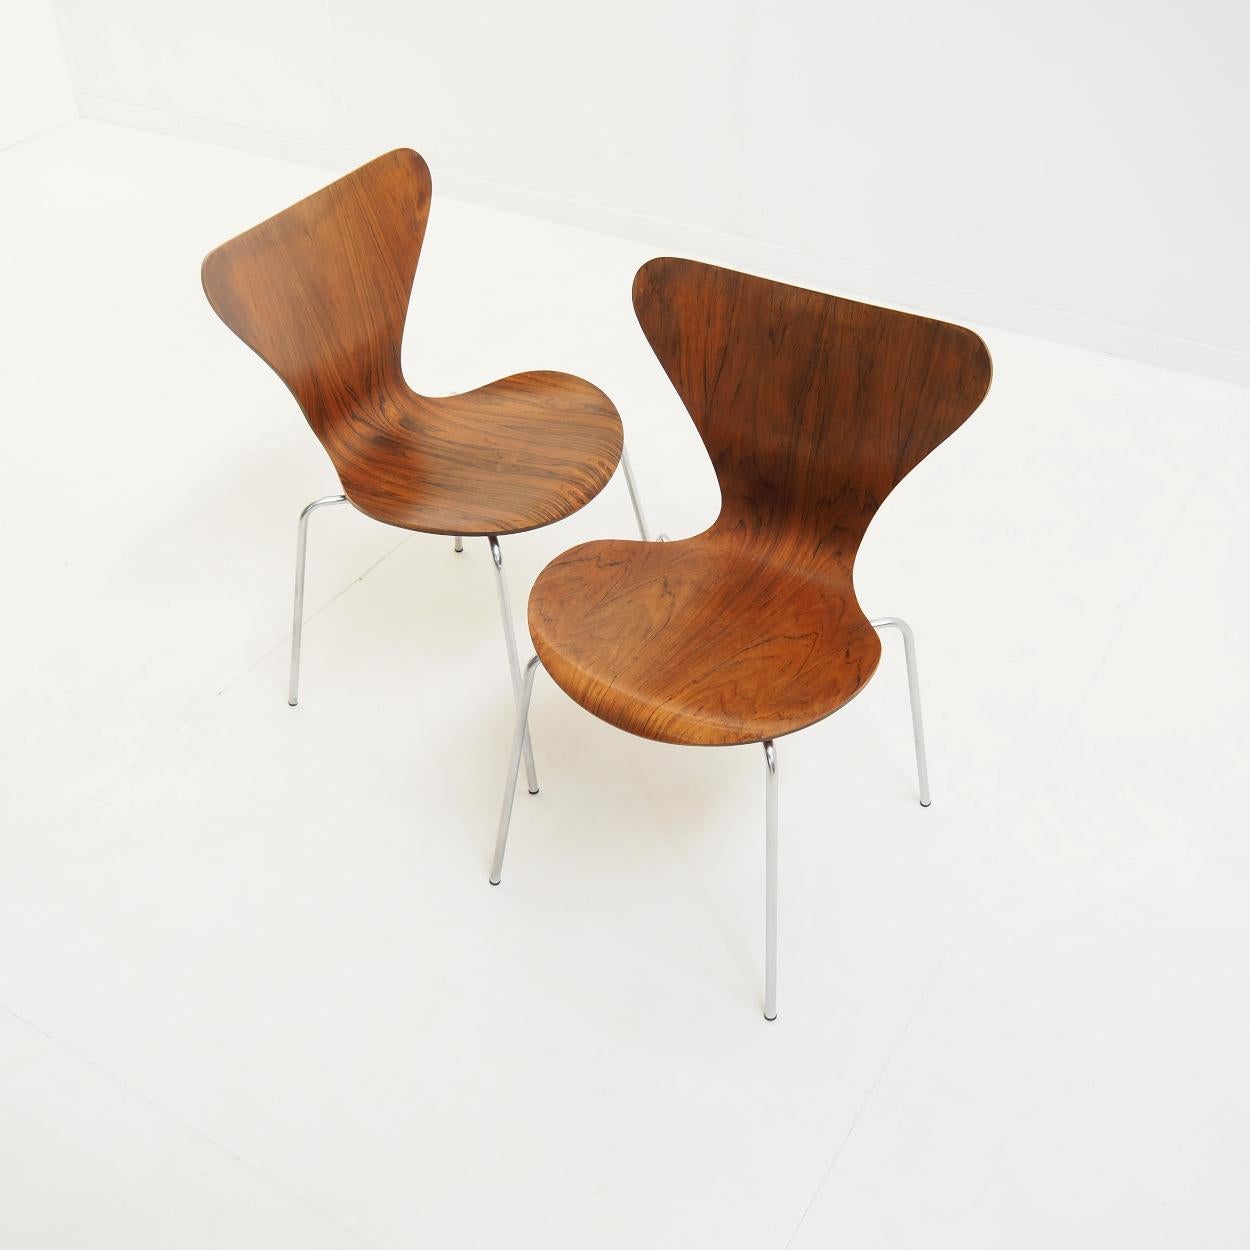 Mid-Century Modern Set of 2 Model No. 3107 Chairs by Arne Jacobsen for Fritz Hansen, Rosewood, 1970 For Sale